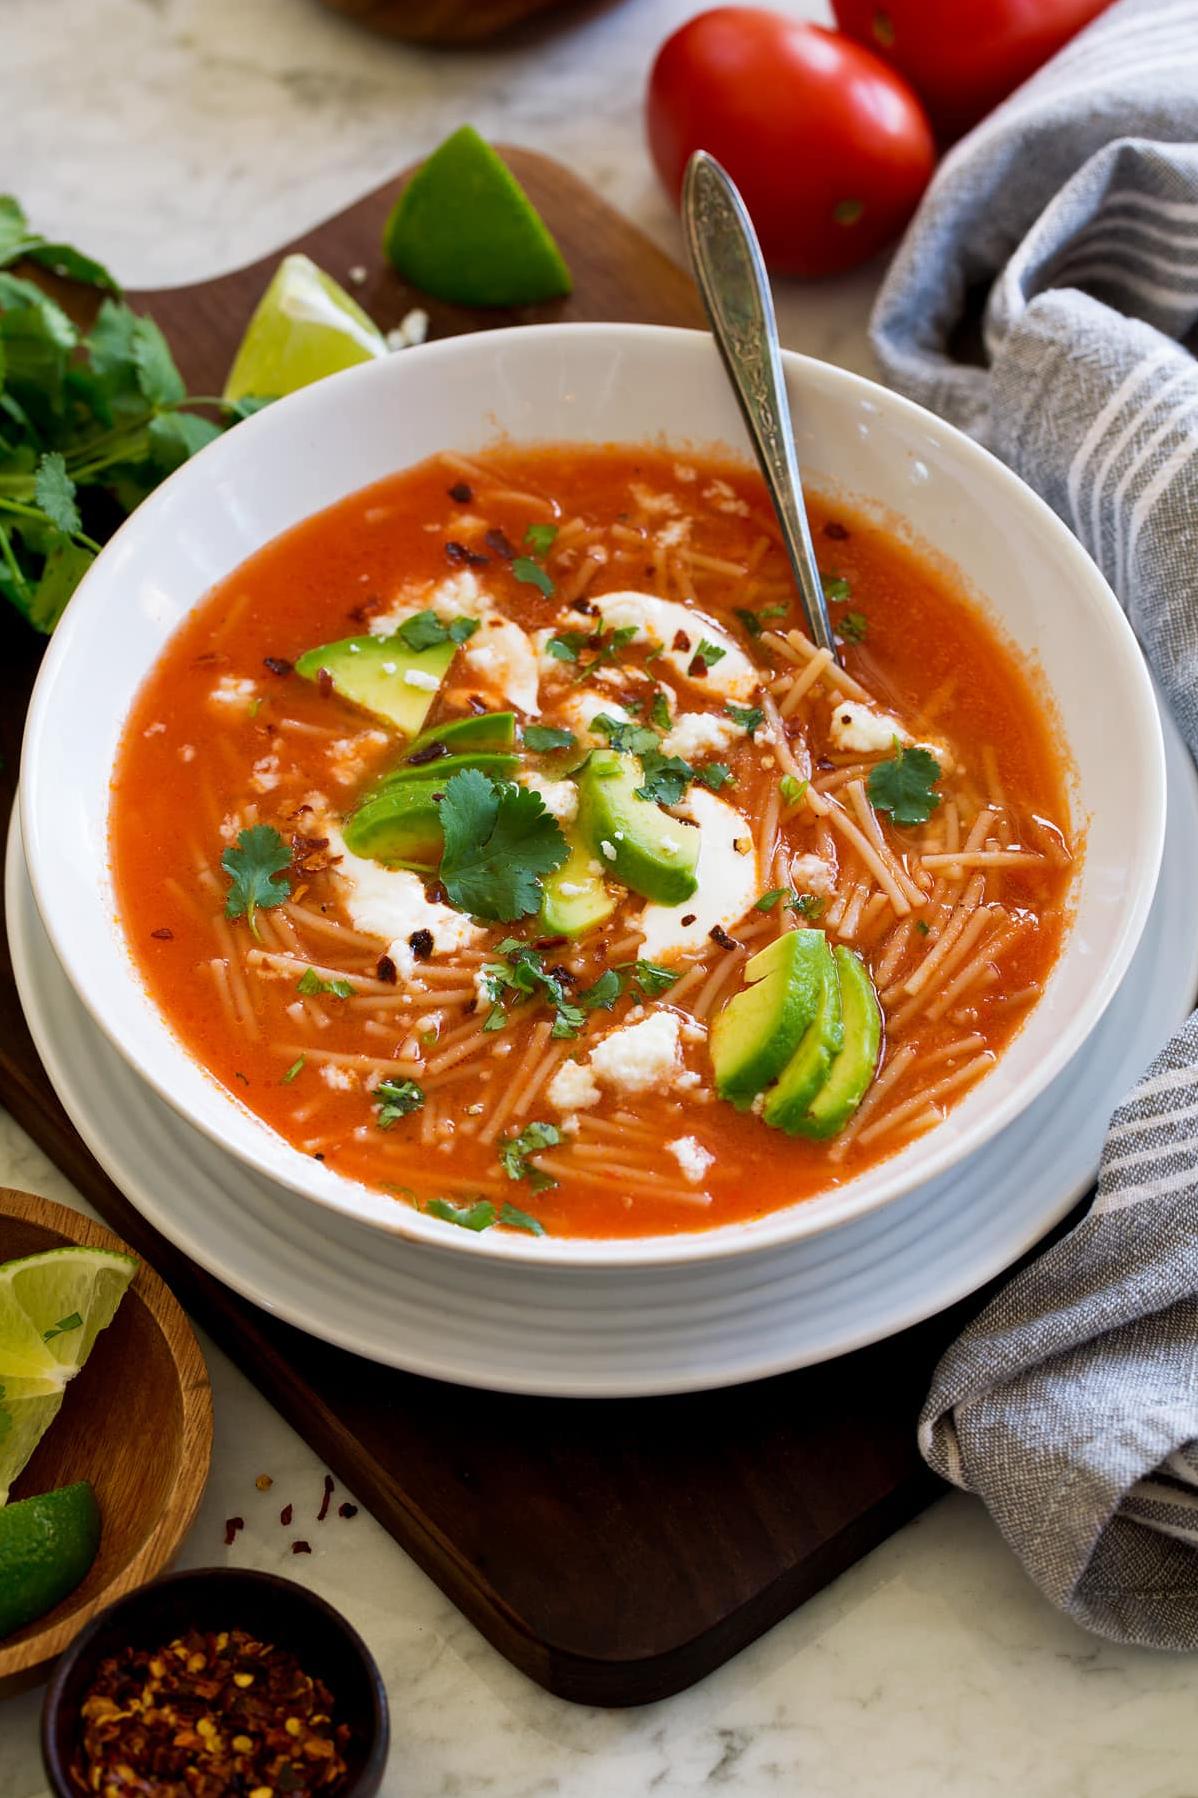  Warm your soul with this classic Mexican soup